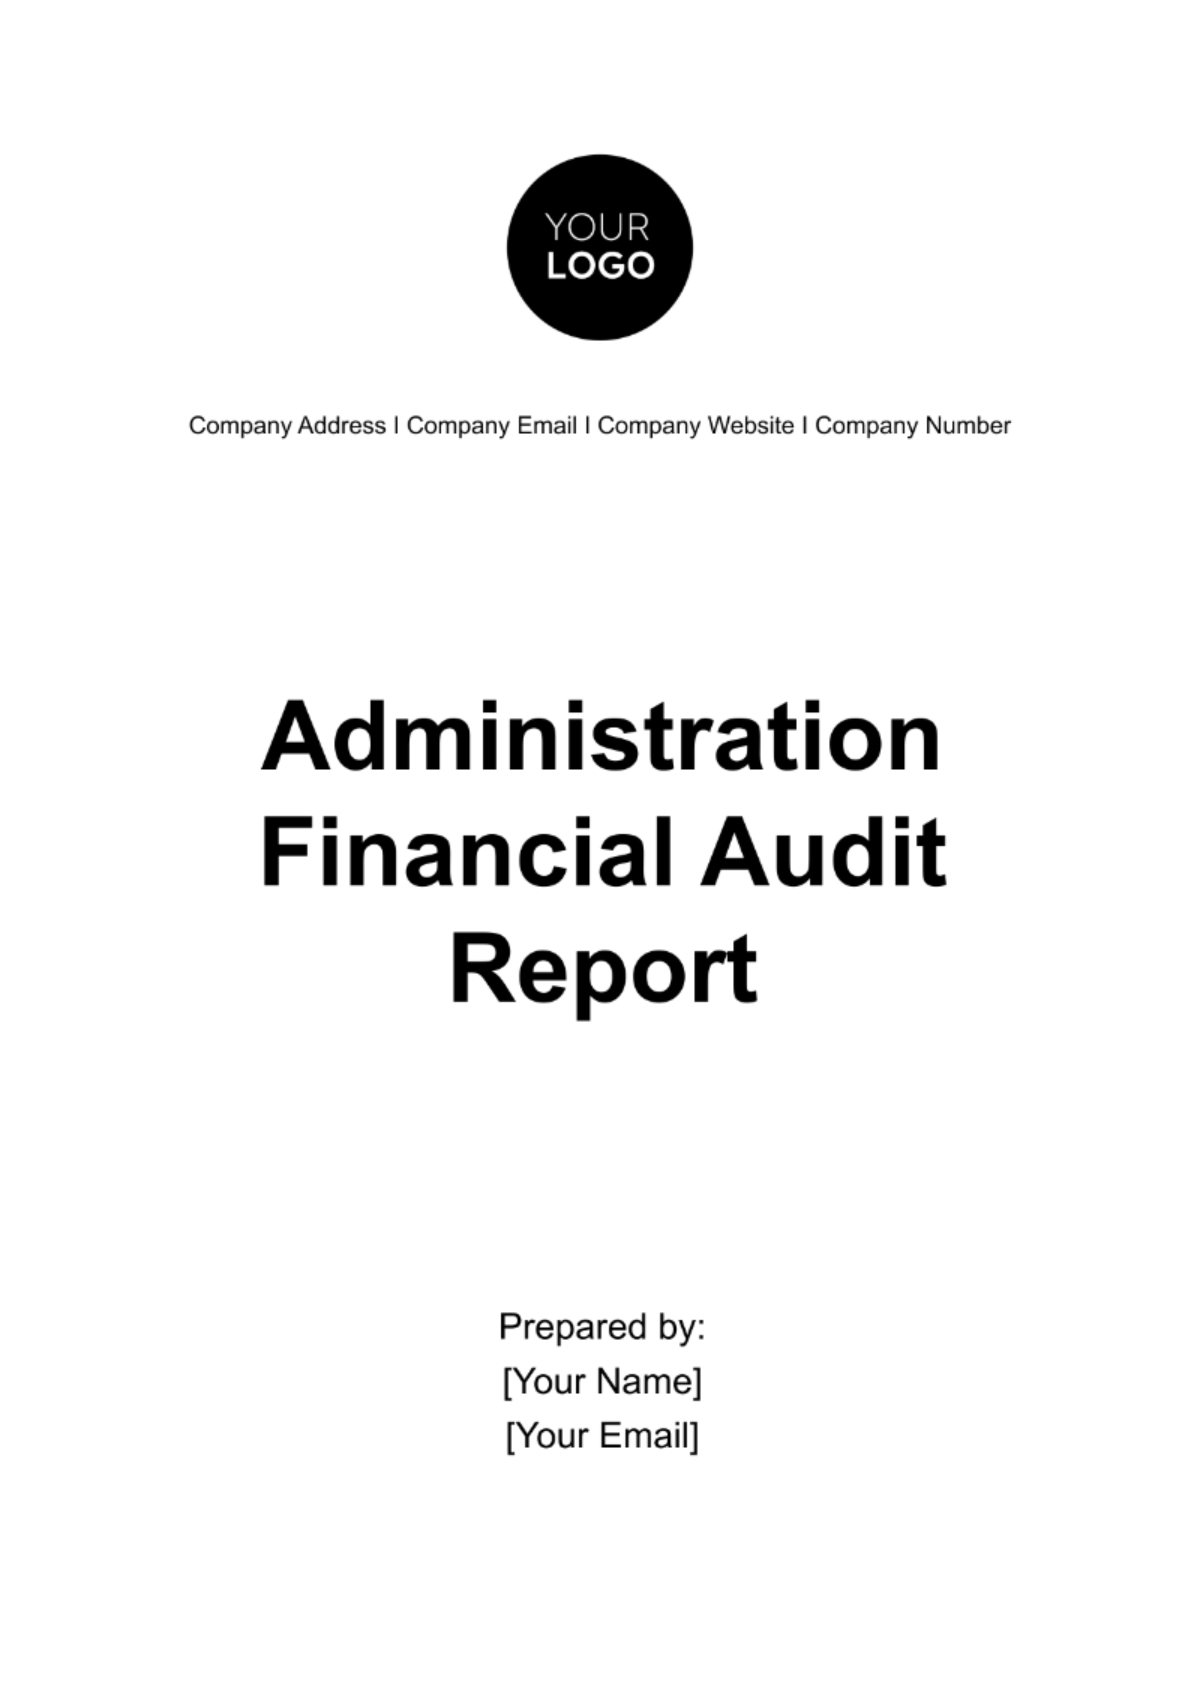 Administration Financial Audit Report Template